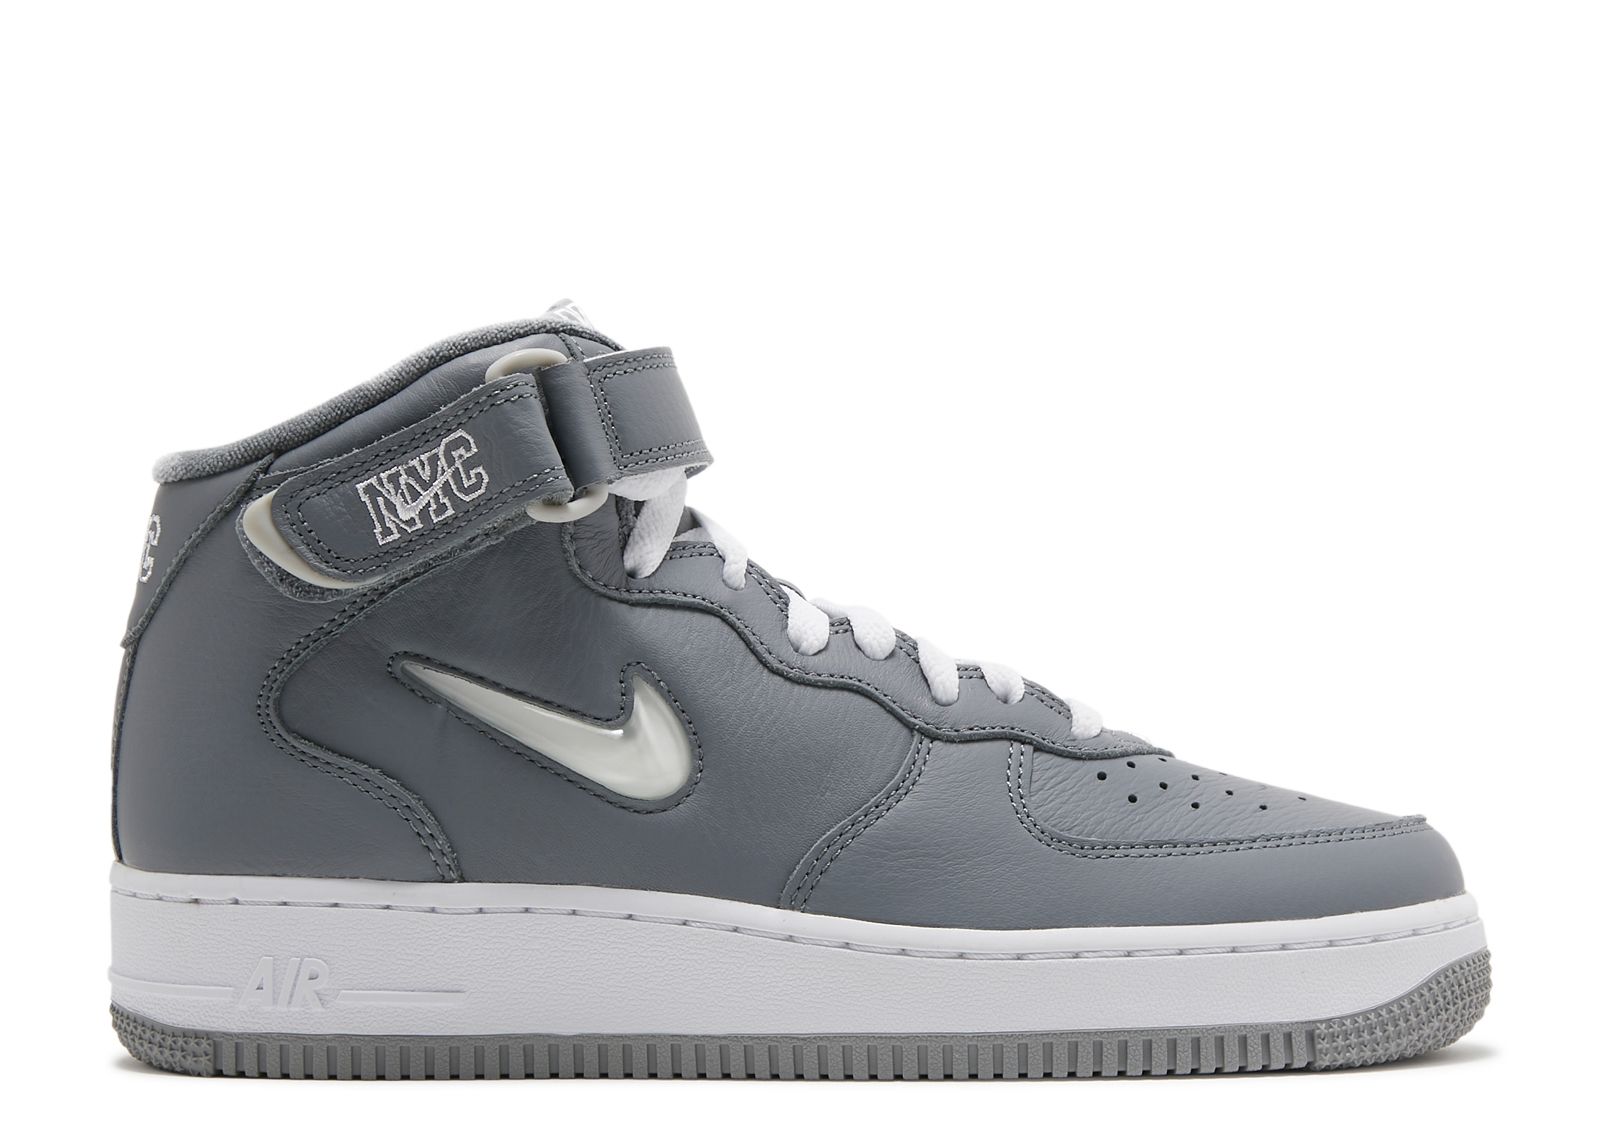 Кроссовки Nike Air Force 1 Mid Jewel Qs 'Nyc - Cool Grey', серый origina nike air barrage mid qs men vintage air cushion breathable outdoor sports sneakers basketball shoes